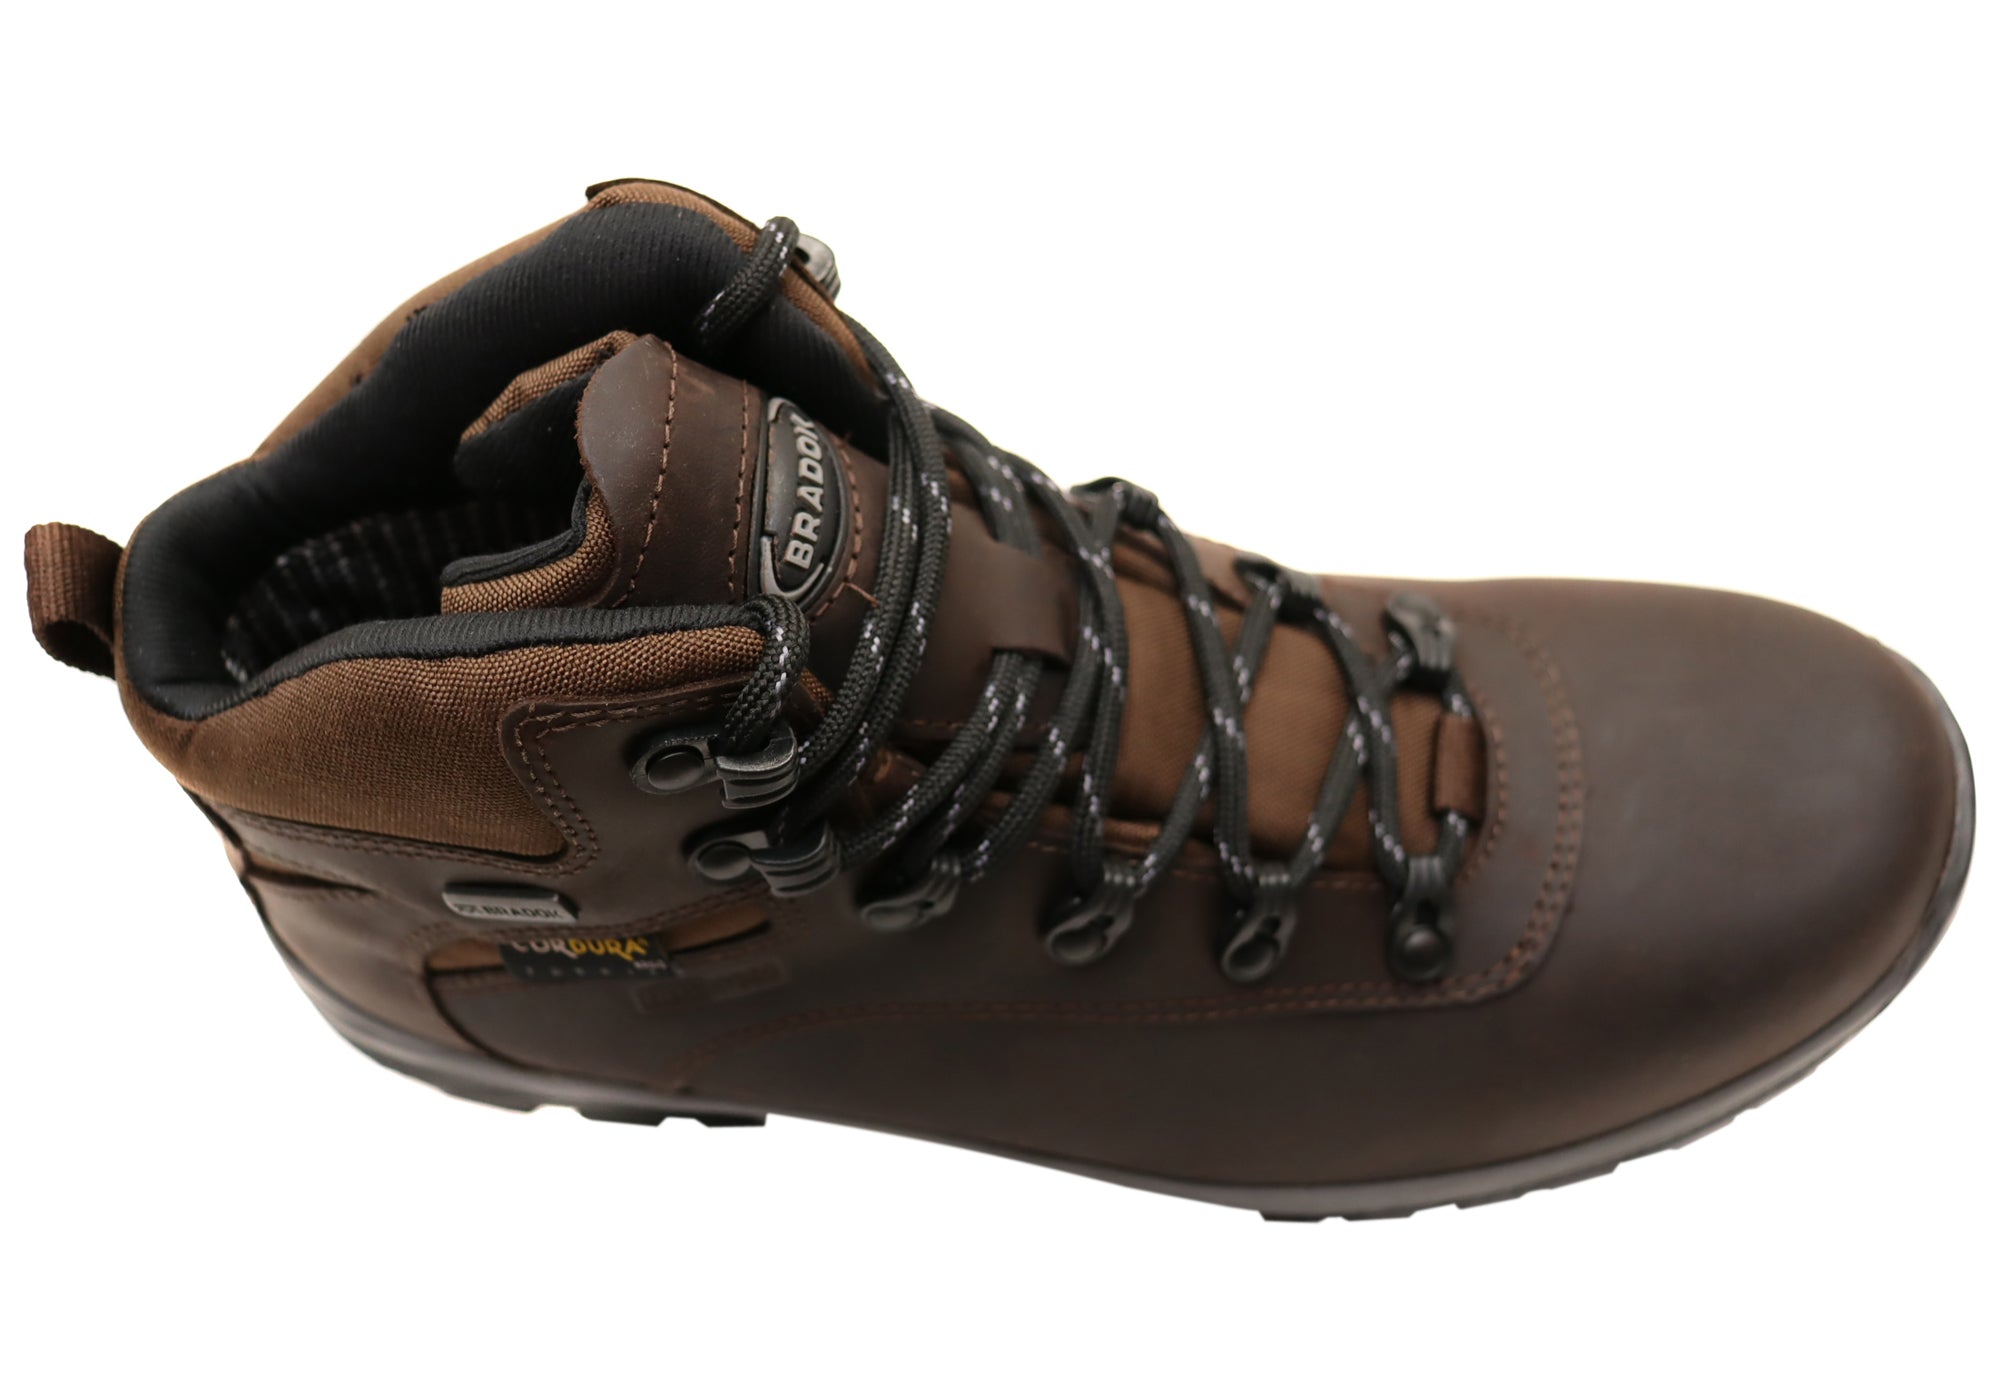 Bradok Aconcagua Mens Comfort Leather Hiking Boots Made In Brazil